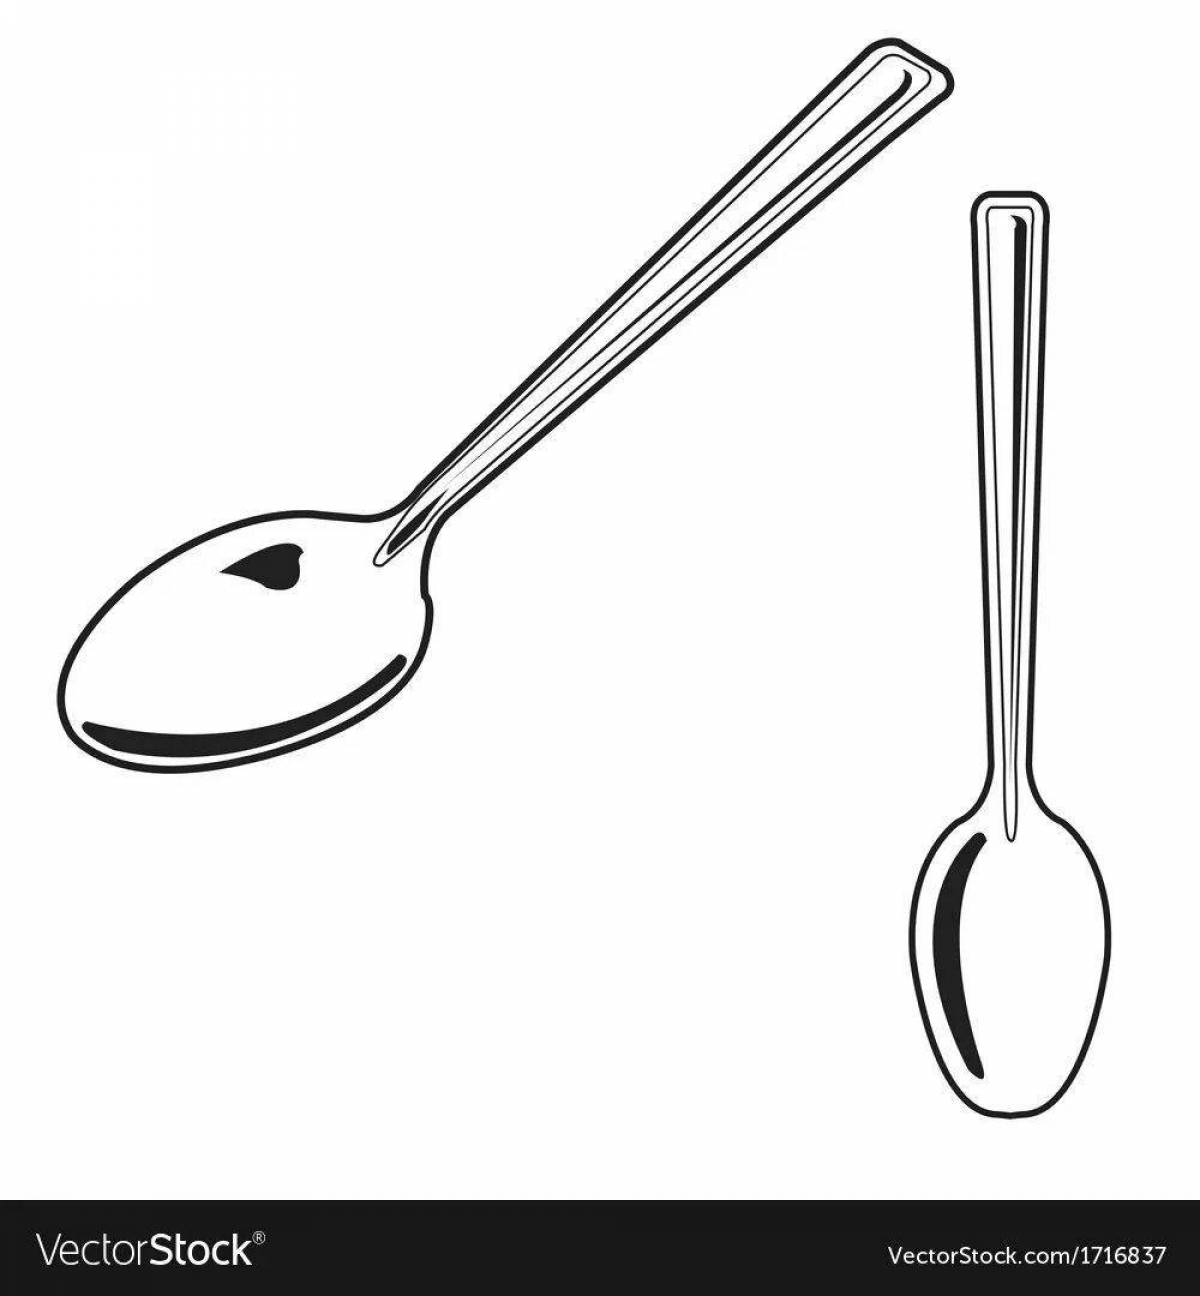 Coloring radiant spoon for kids